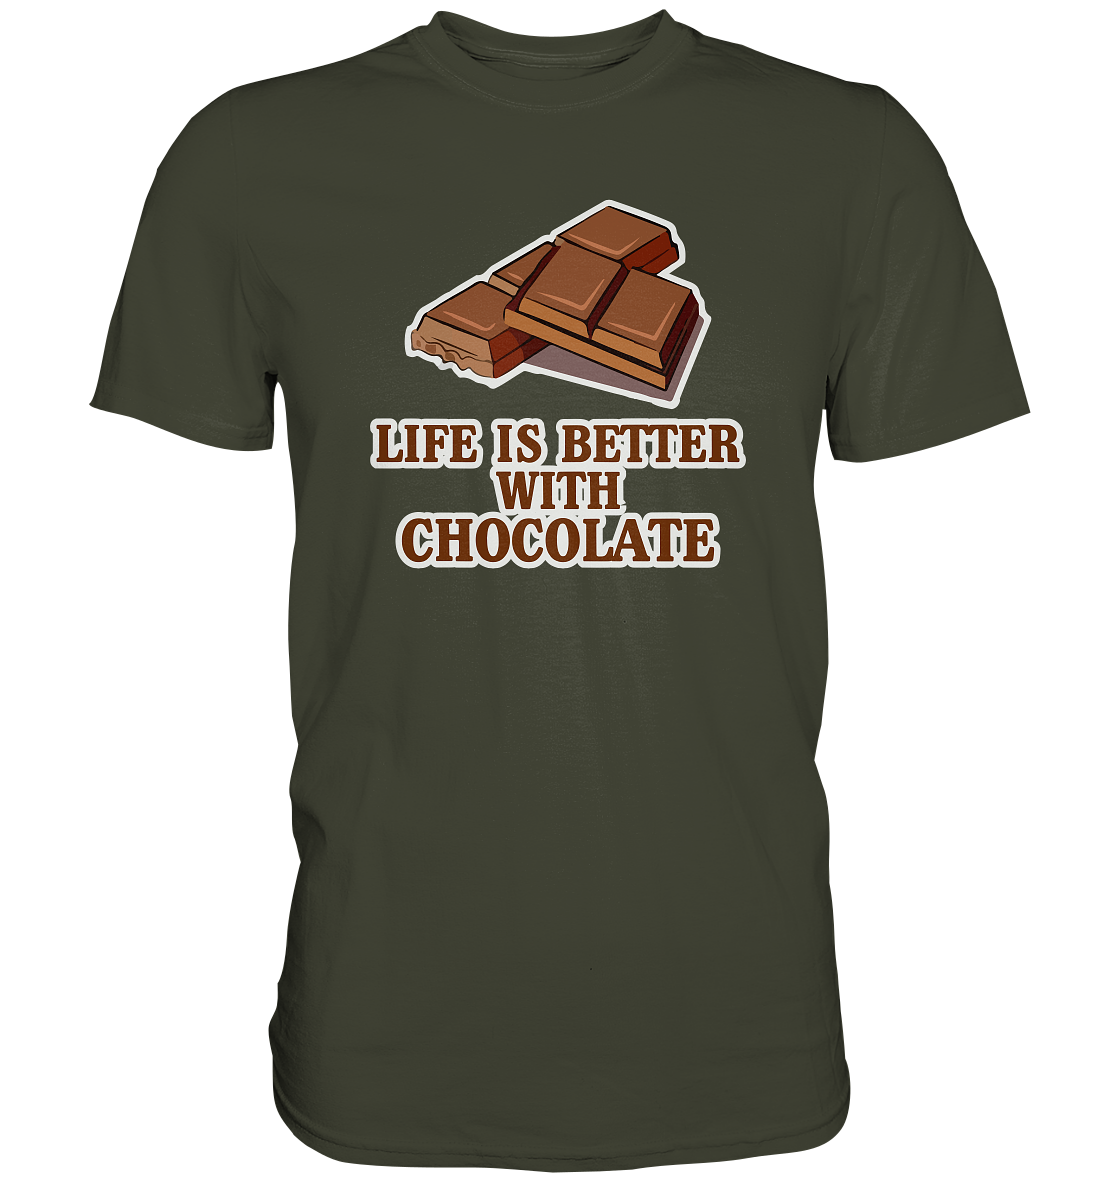 Life is better with chocolate - Premium Shirt